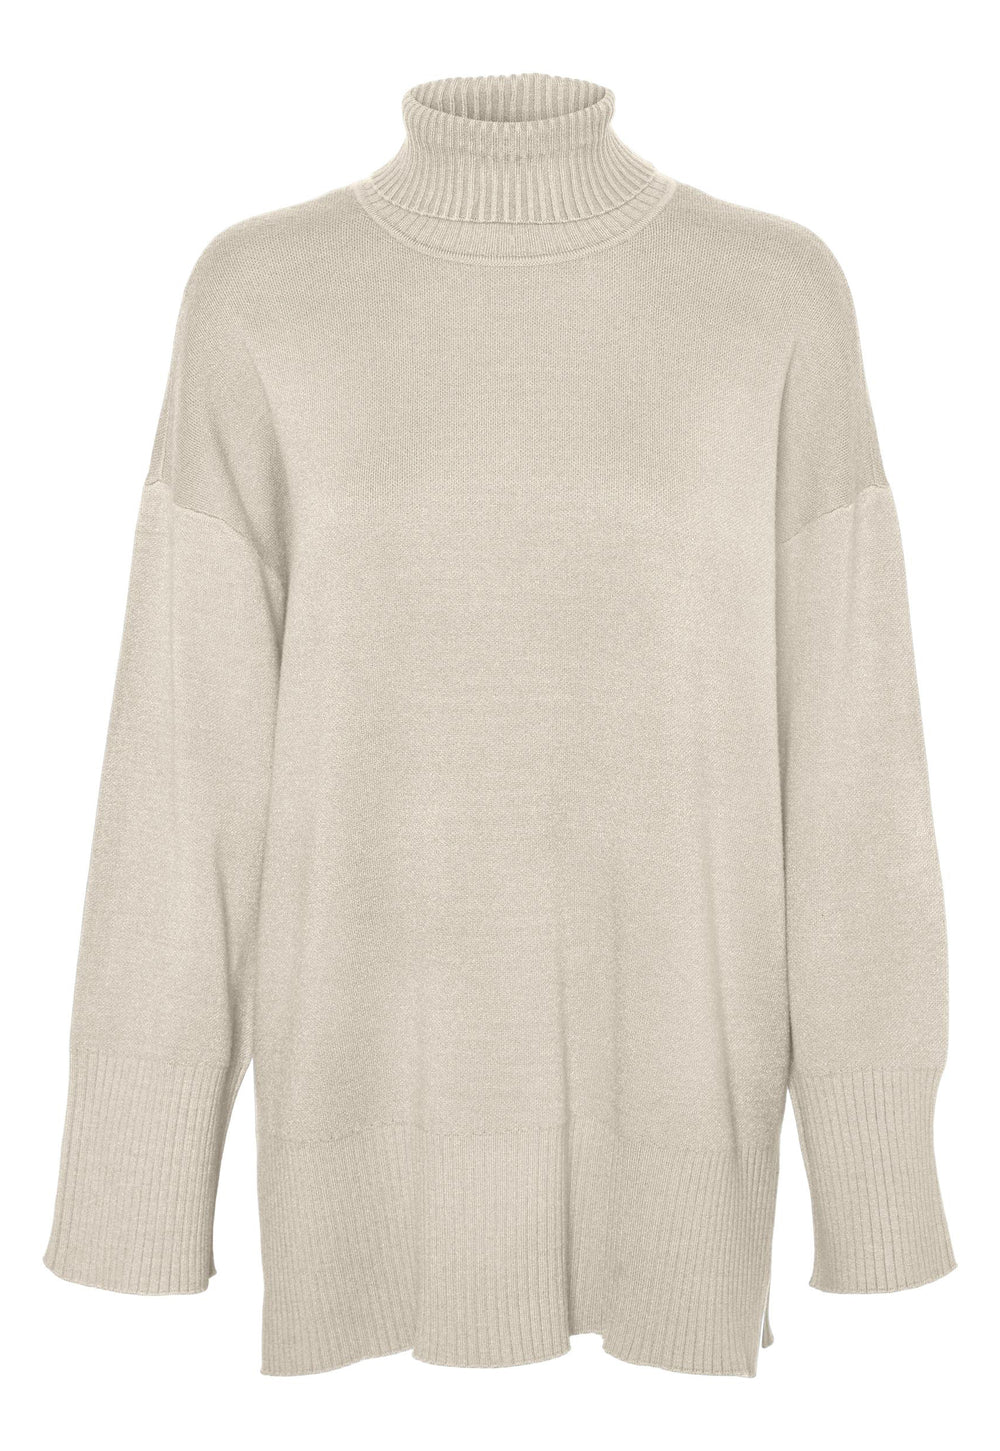 VERO MODA Gold Soft Knit Rollneck Longline Jumper with Side Splits in Cream - One Nation Clothing